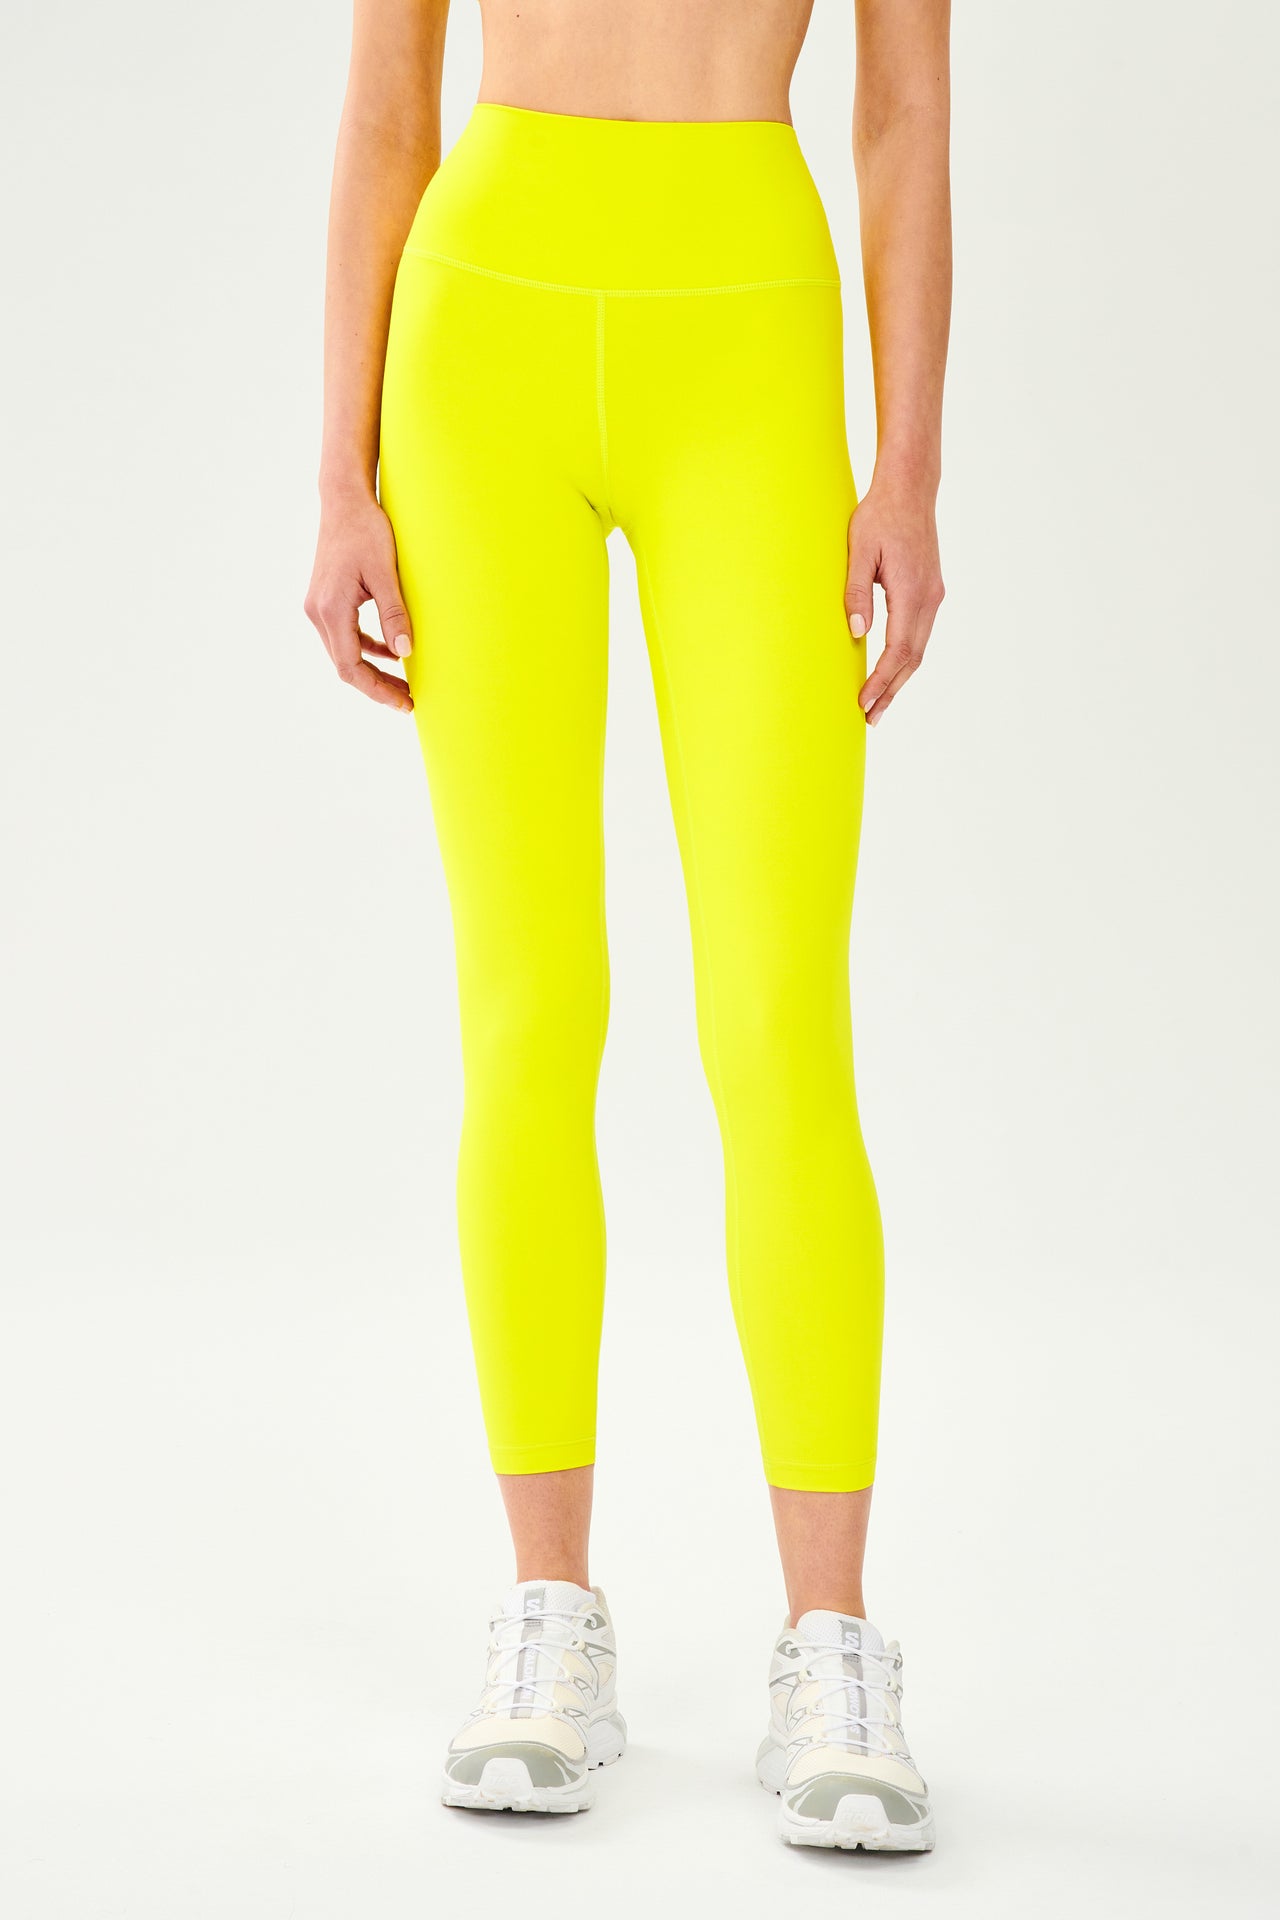 Front view of model wearing bright yellow high waist  leggings and white shoes